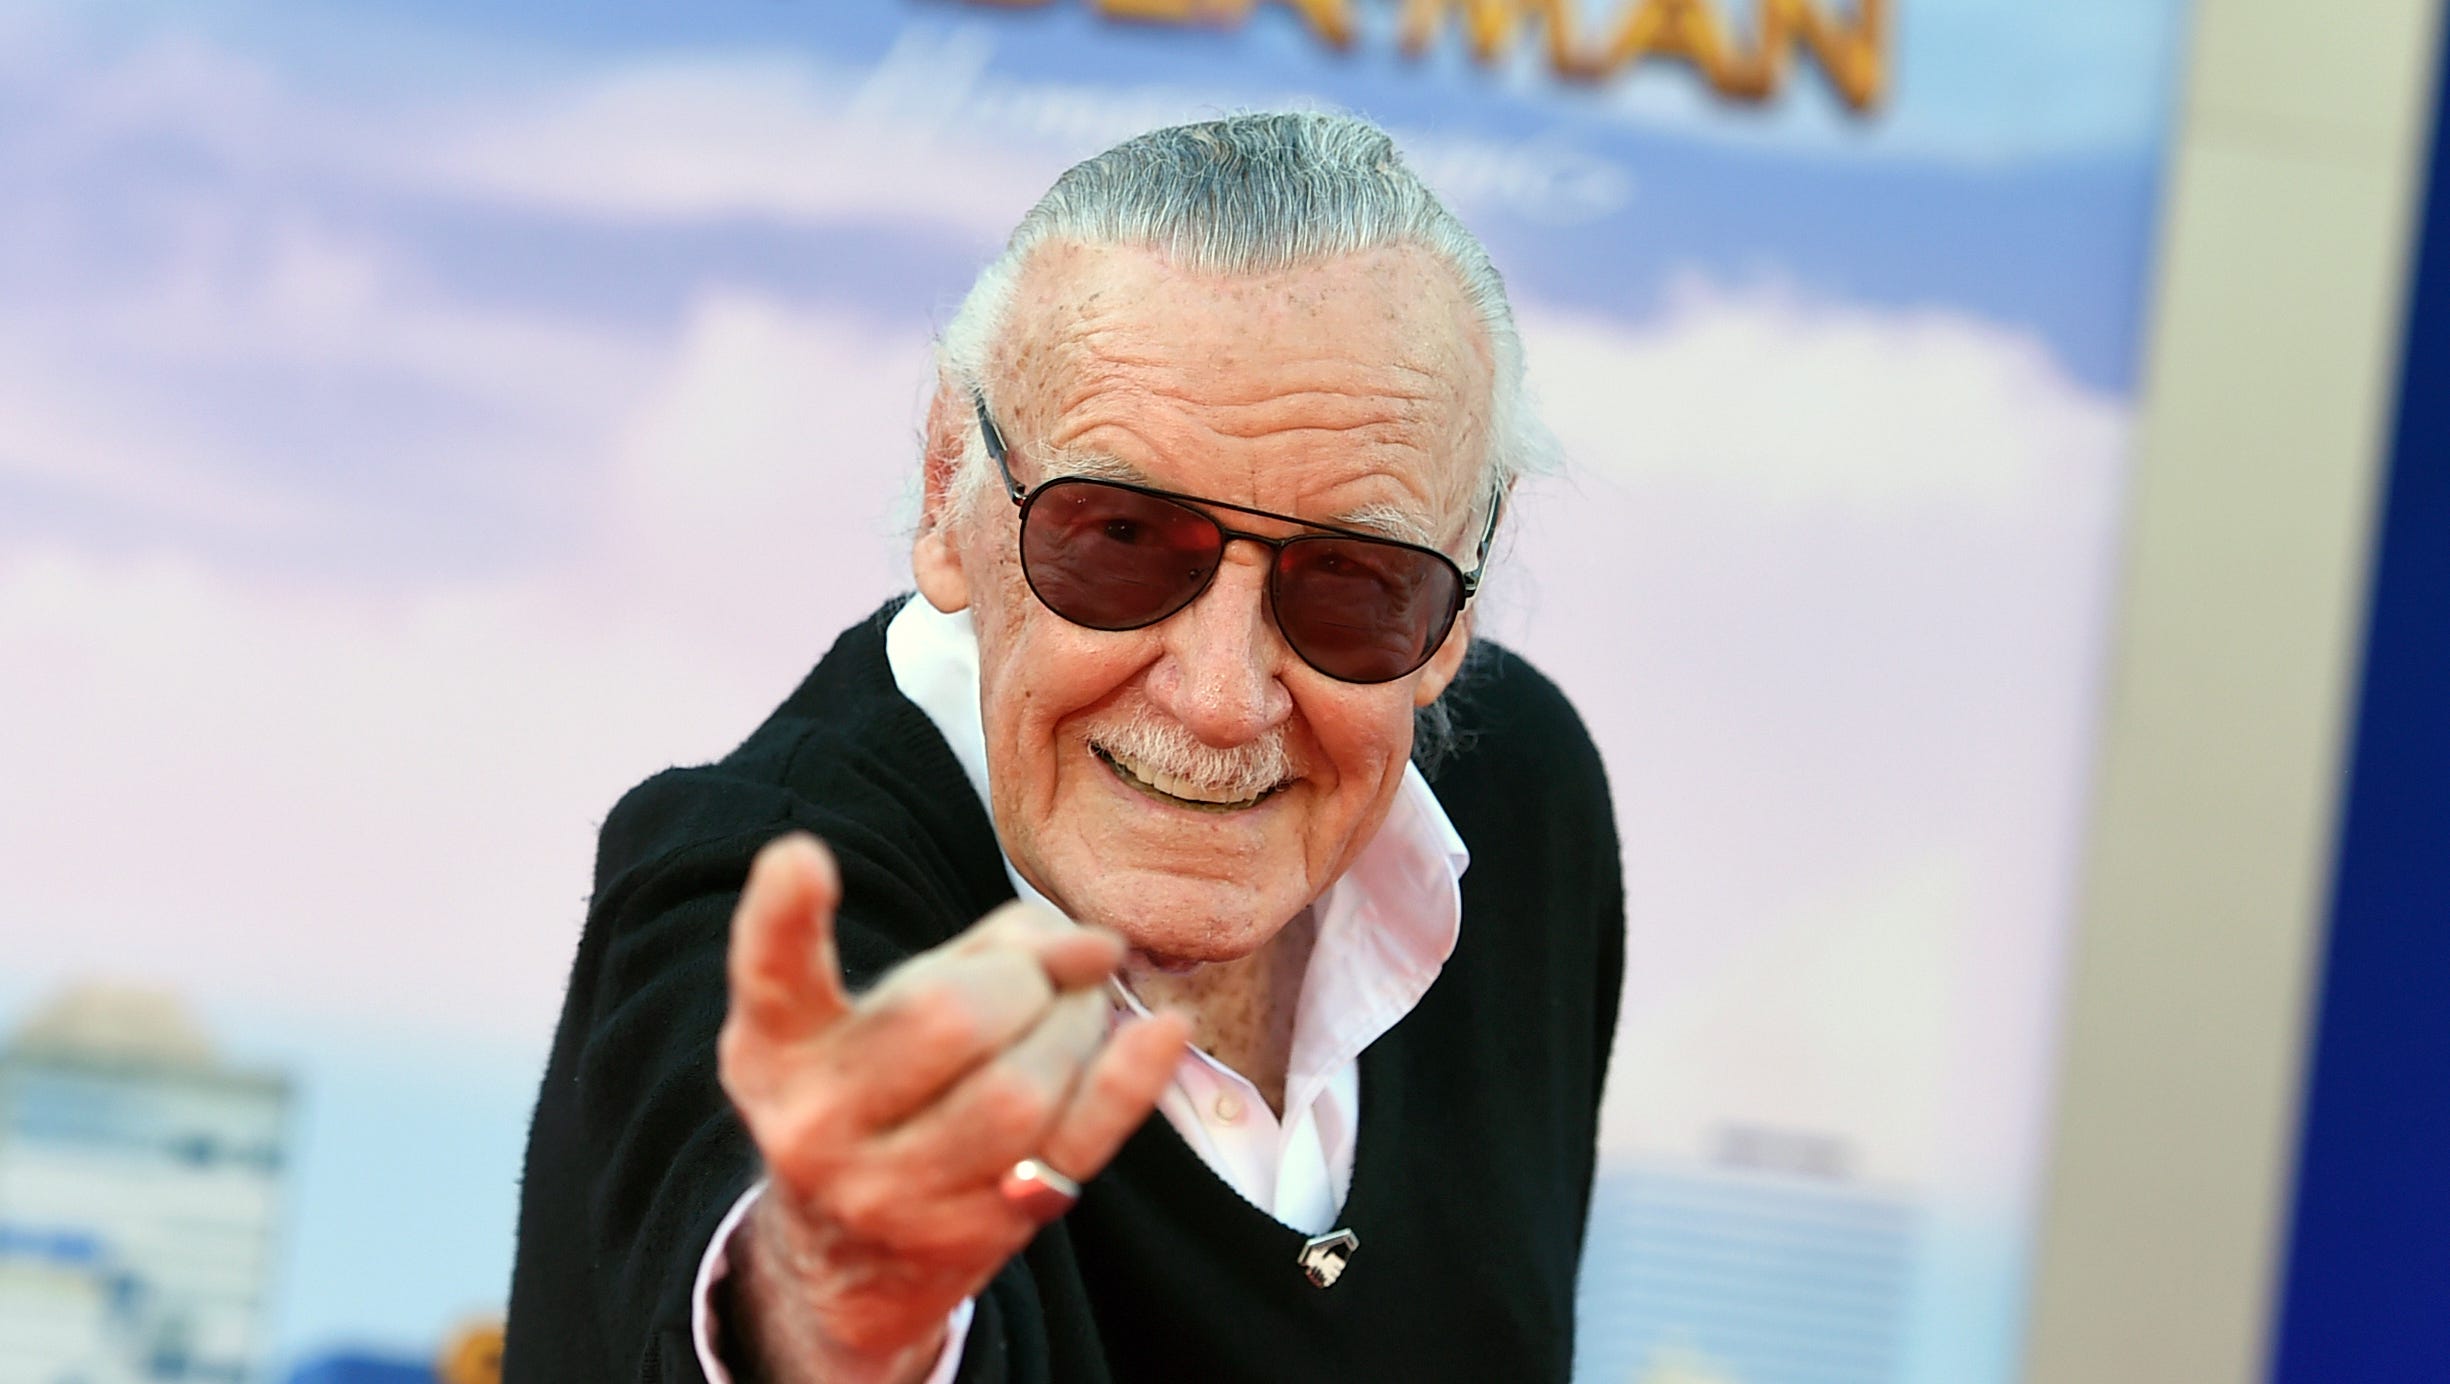 Stan Lee cause of death revealed: What killed the Marvel Comics icon?